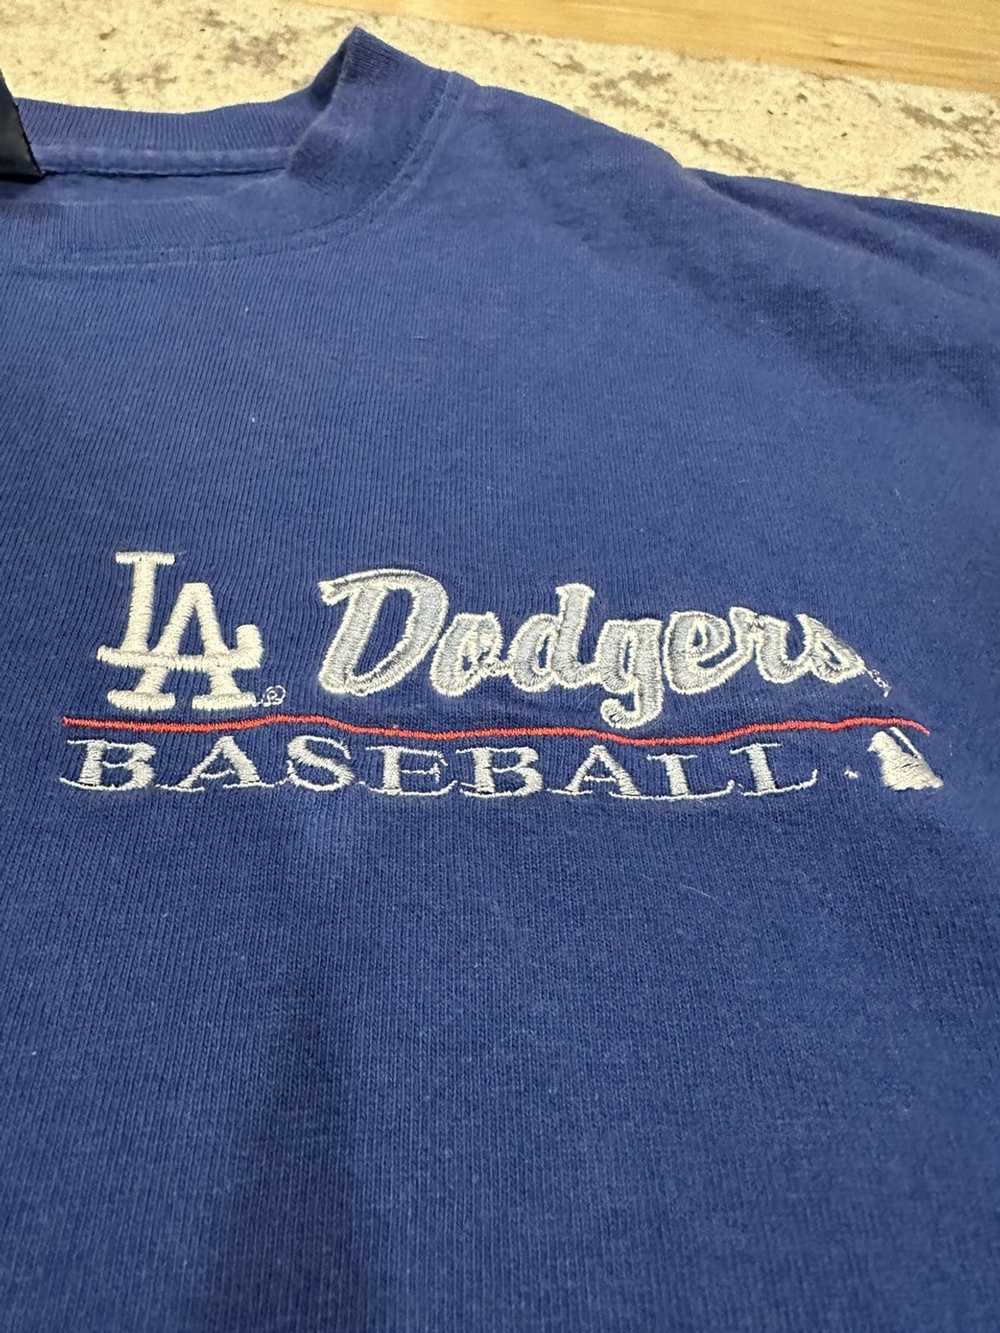 Los Angeles Dodgers Stitches Cooperstown Collection Team Jersey Light  Blue｜TikTok Search